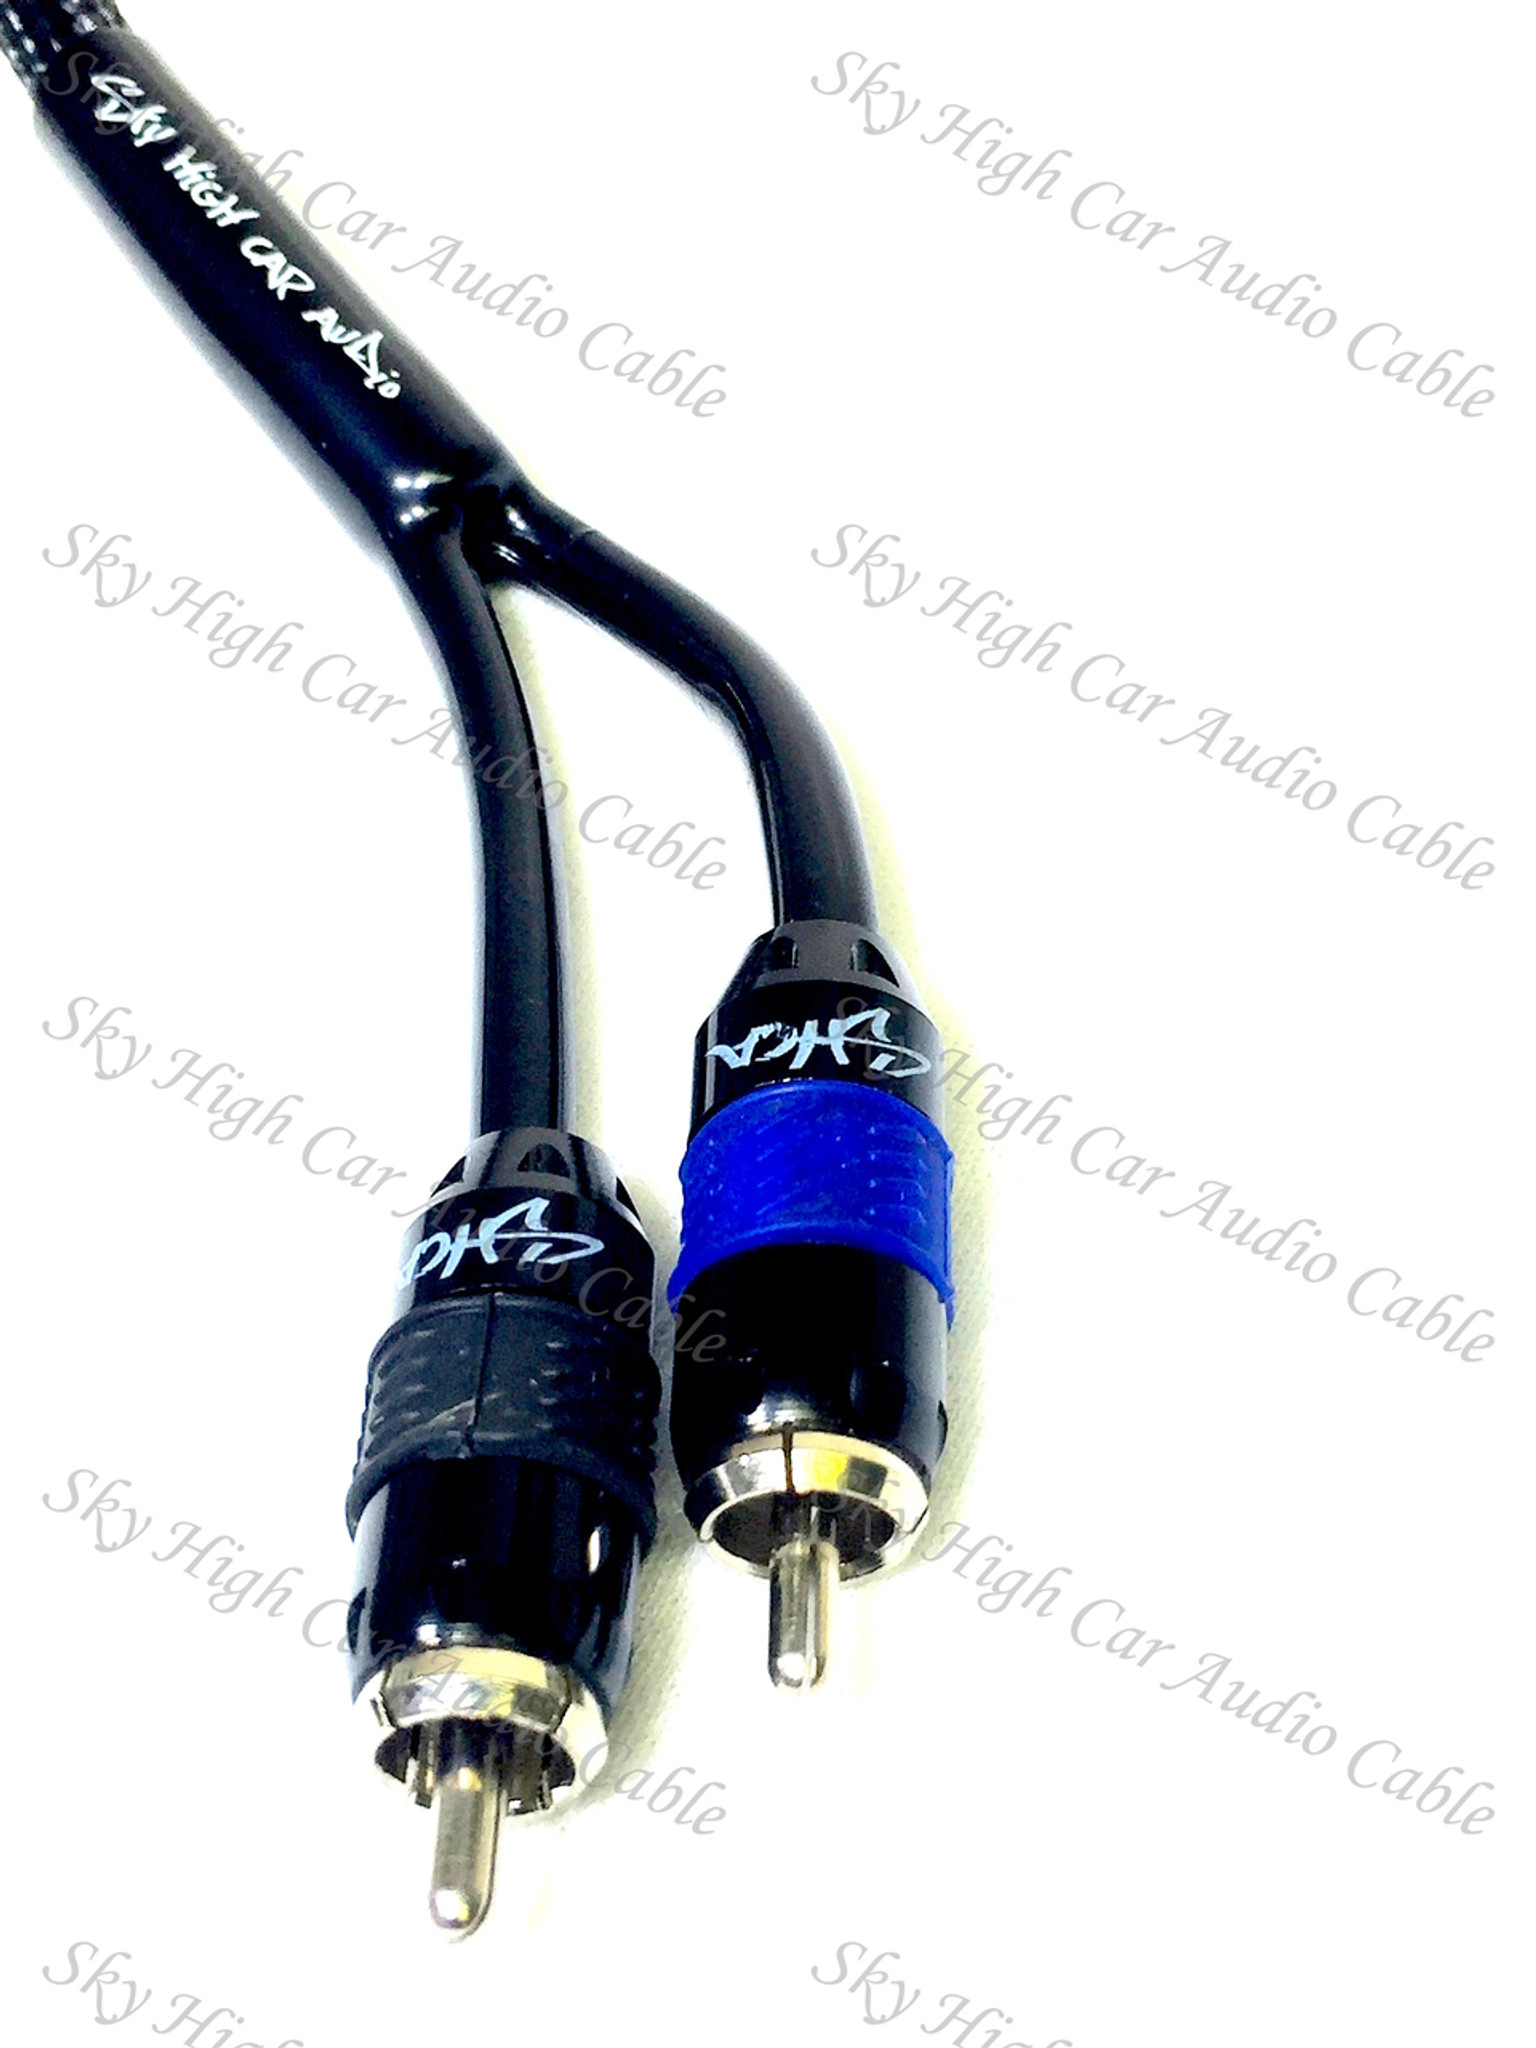 TOP 5 BEST RCA CABLES FOR CAR AUDIO IN 2023, by Car Electronix